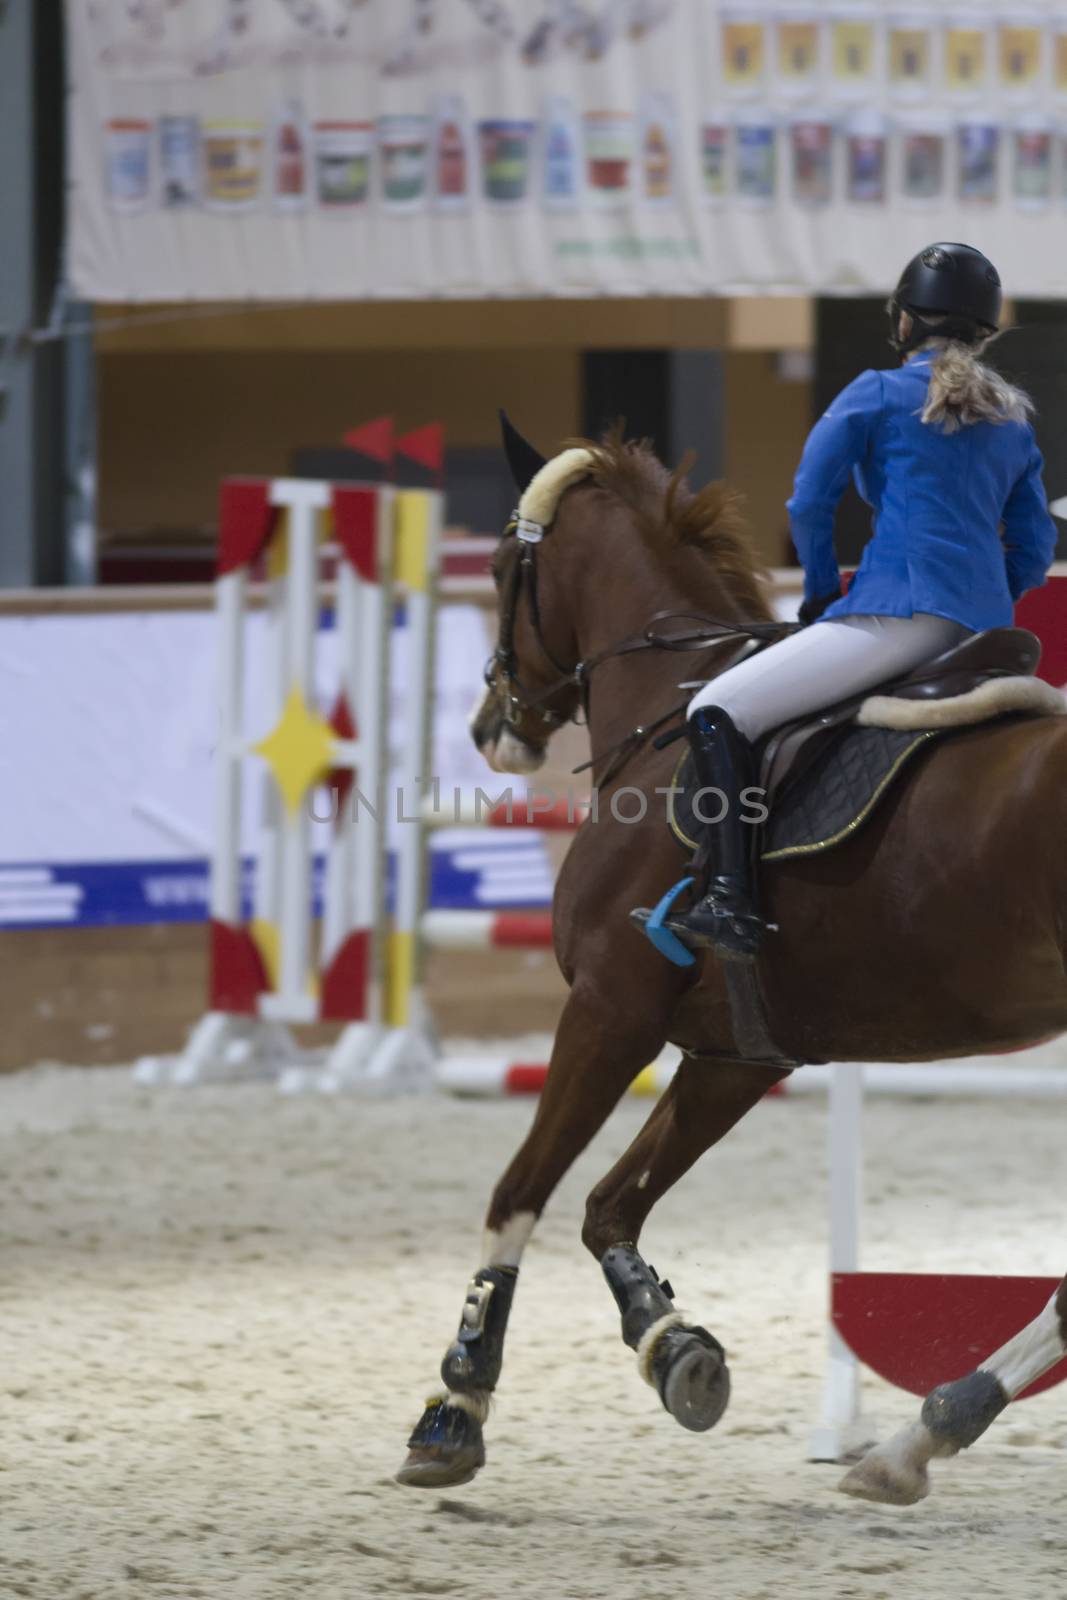 Young equestrian rider running on bay horse at show jumping competition, telephoto shot